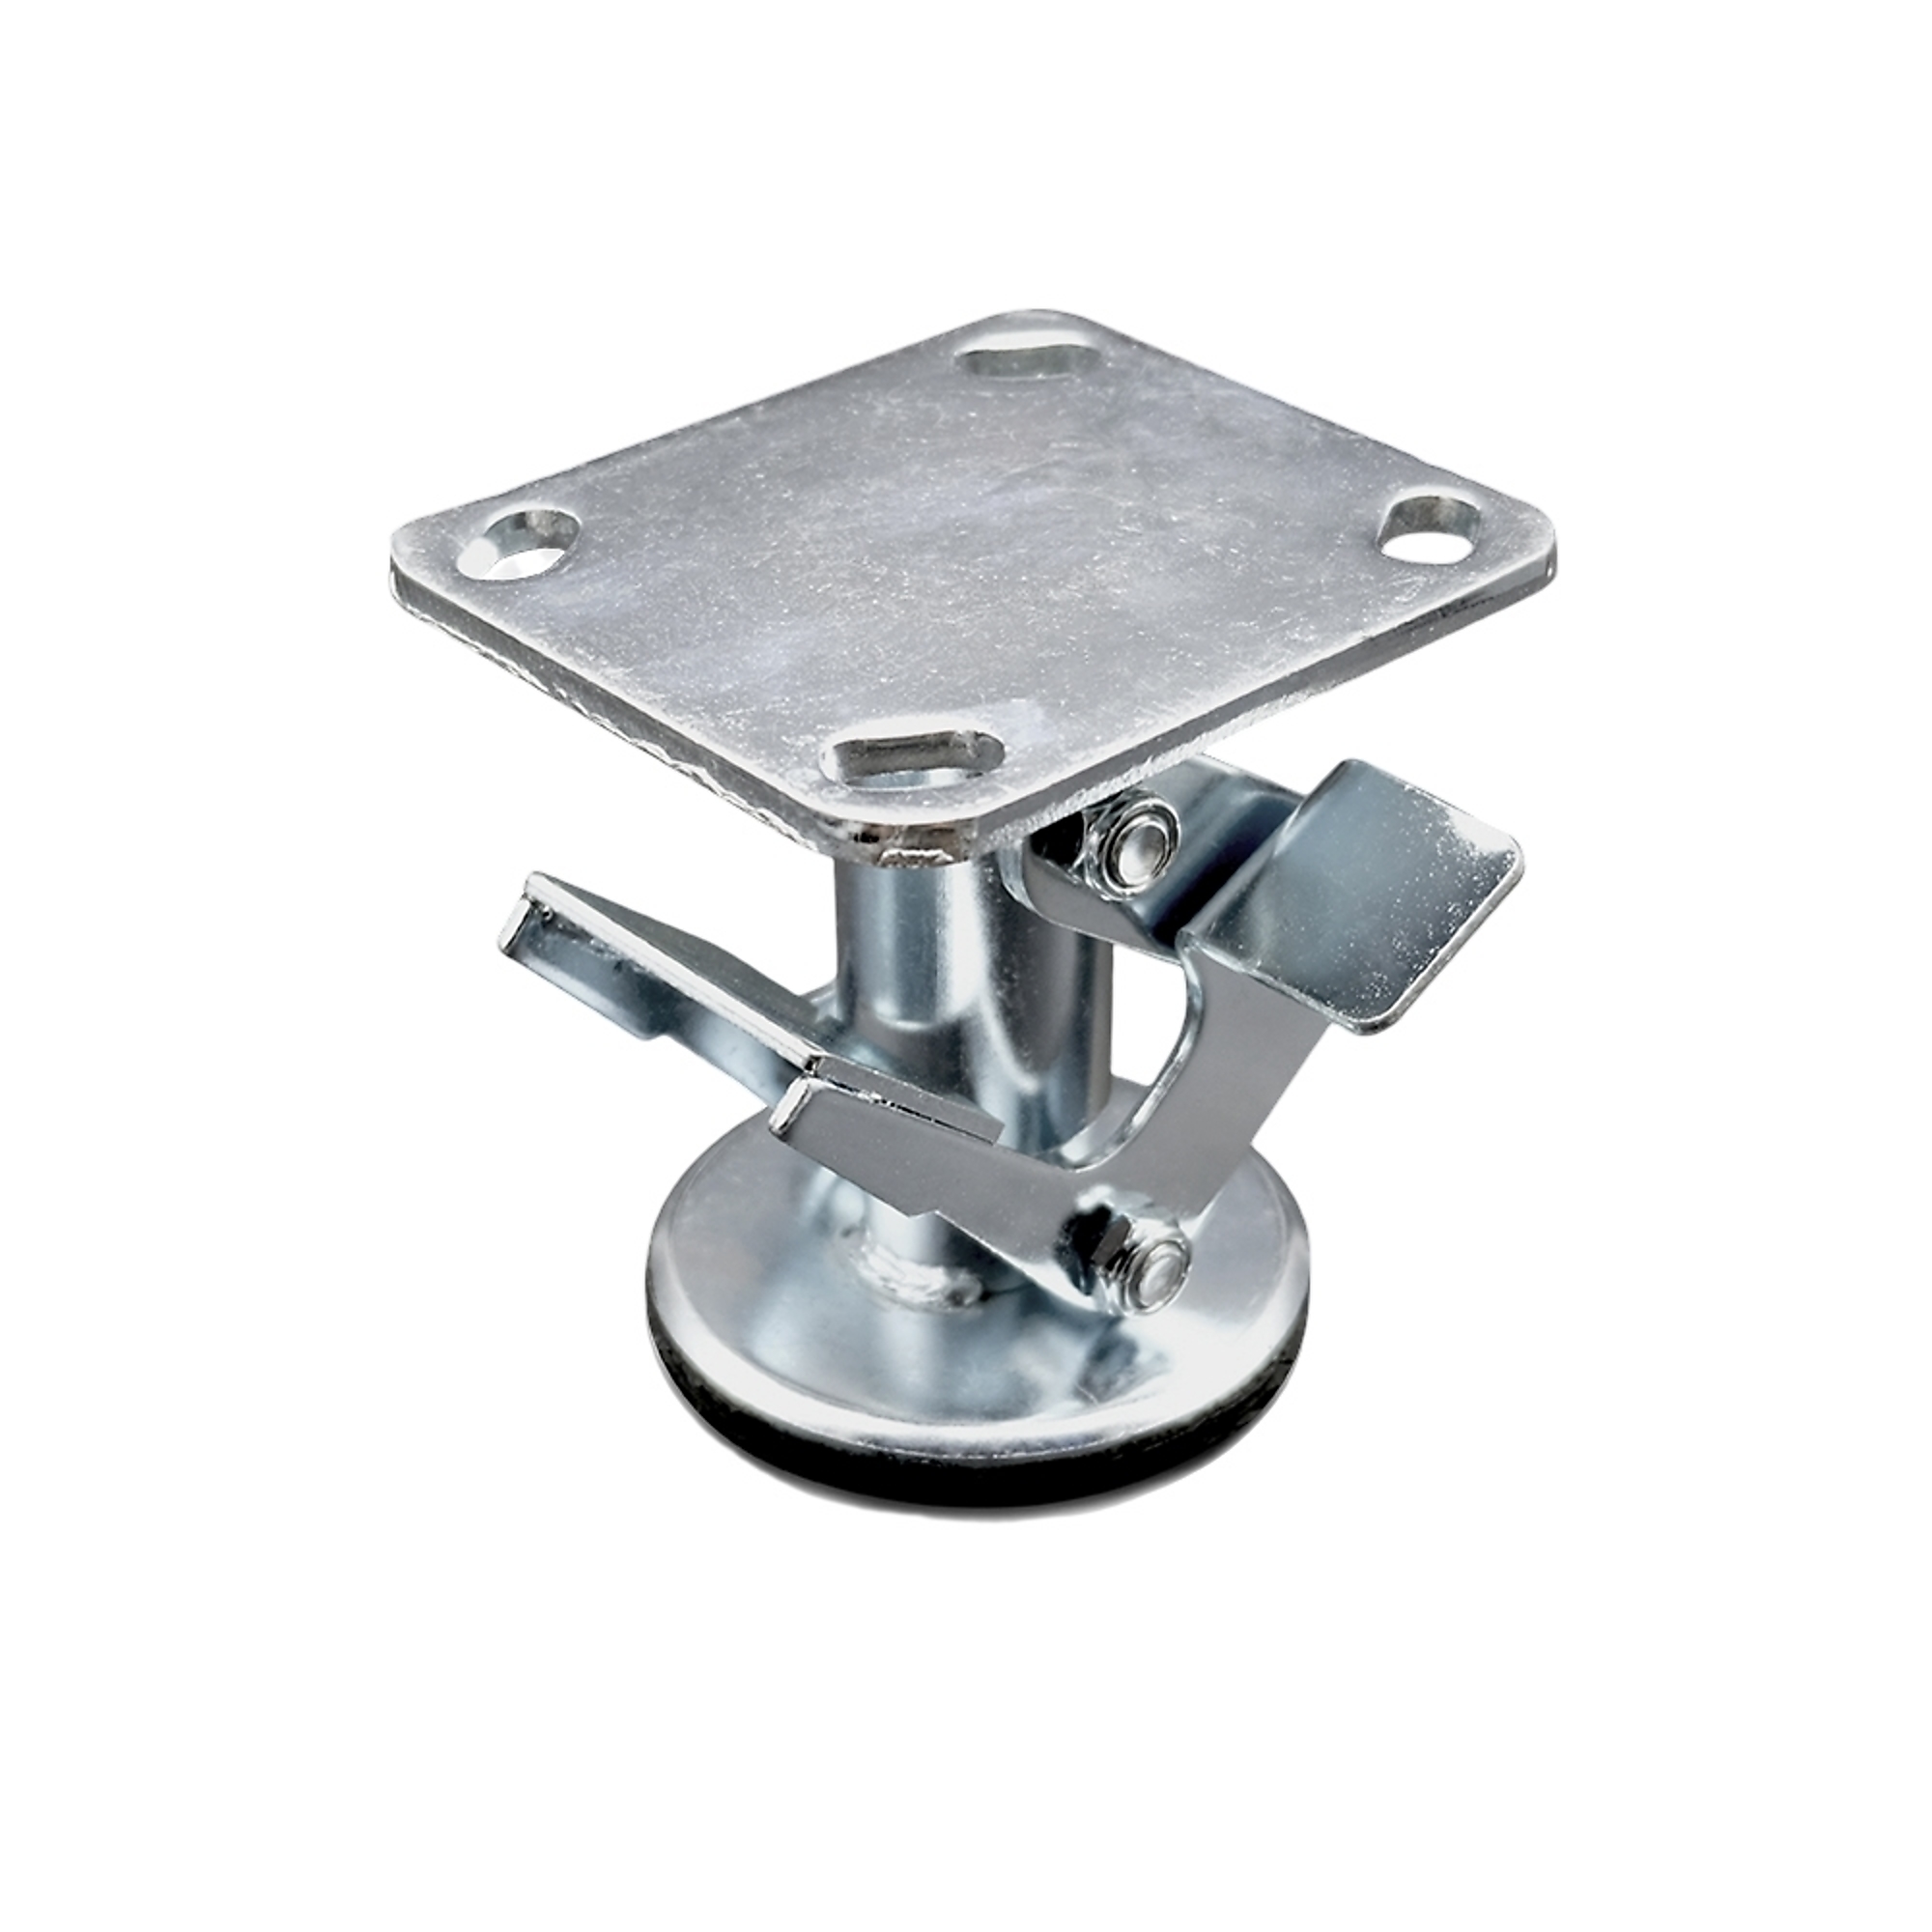 Service Caster, 4Inch Double Pedal Floor Truck Lock, Caster Type Rigid, Package (qty.) 1, Model SCC-FL400DP